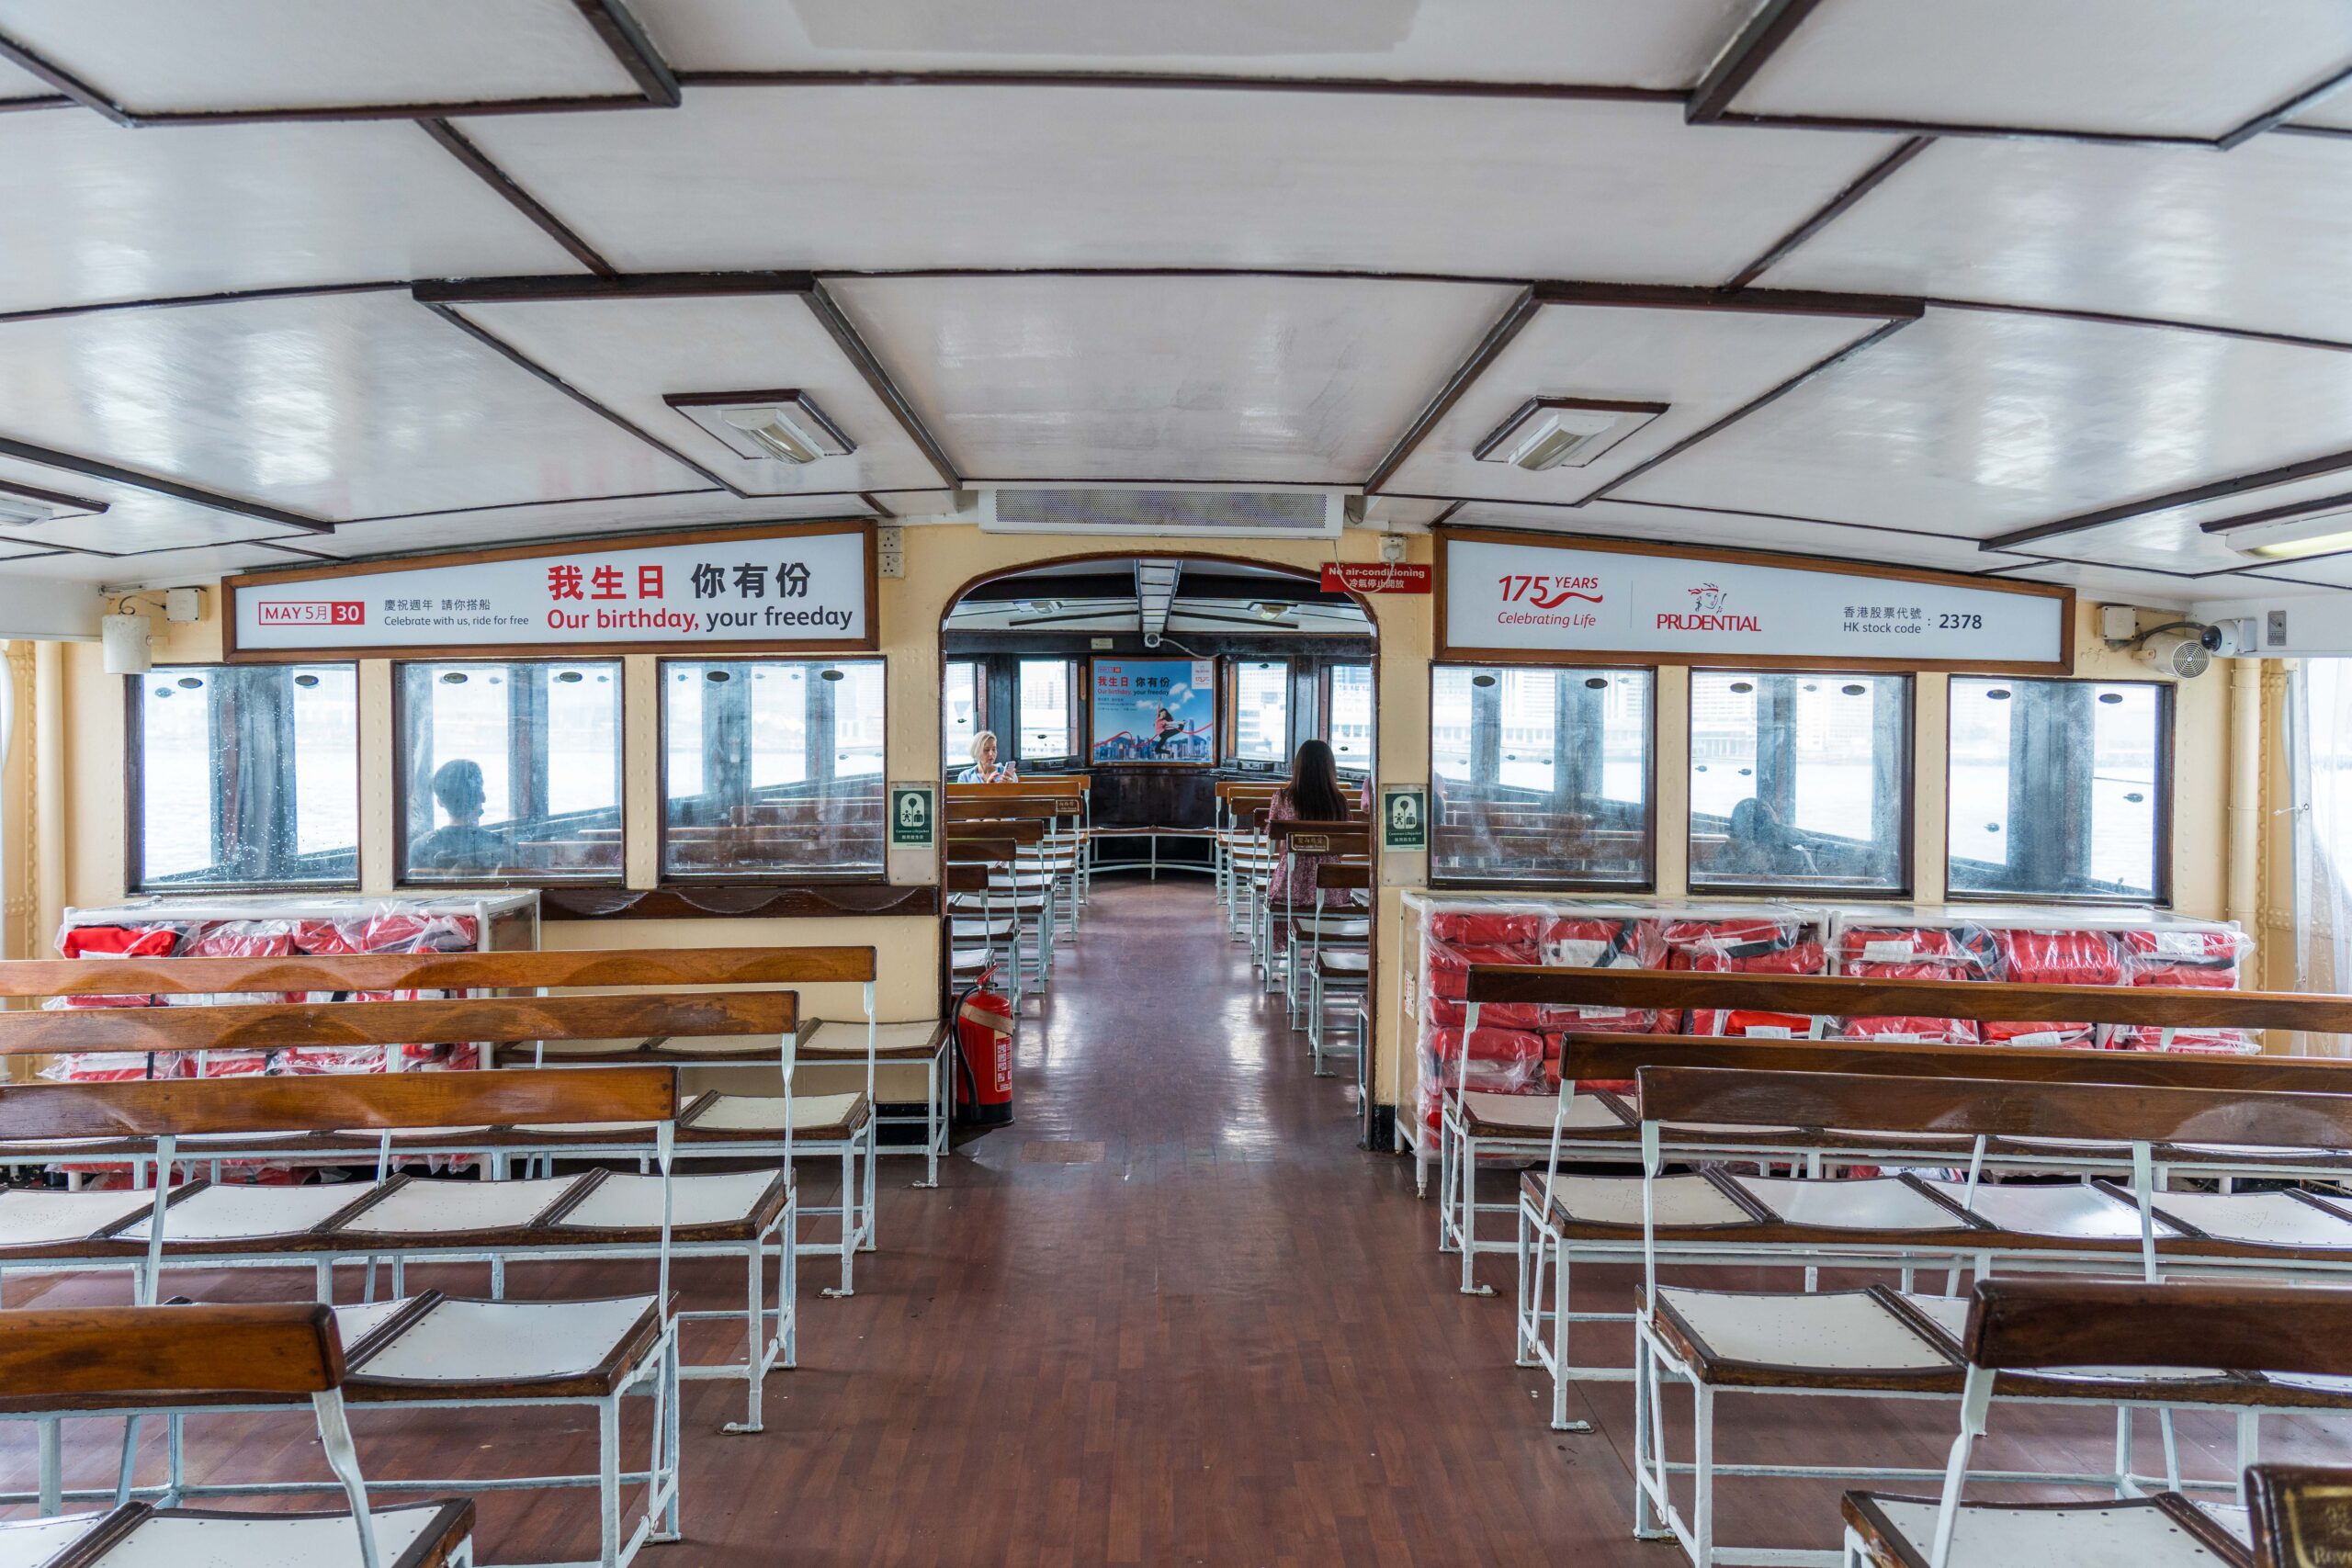 Prudential will give all Star Ferry passengers on May 30 free rides between Tsim Sha Tsui and Central.